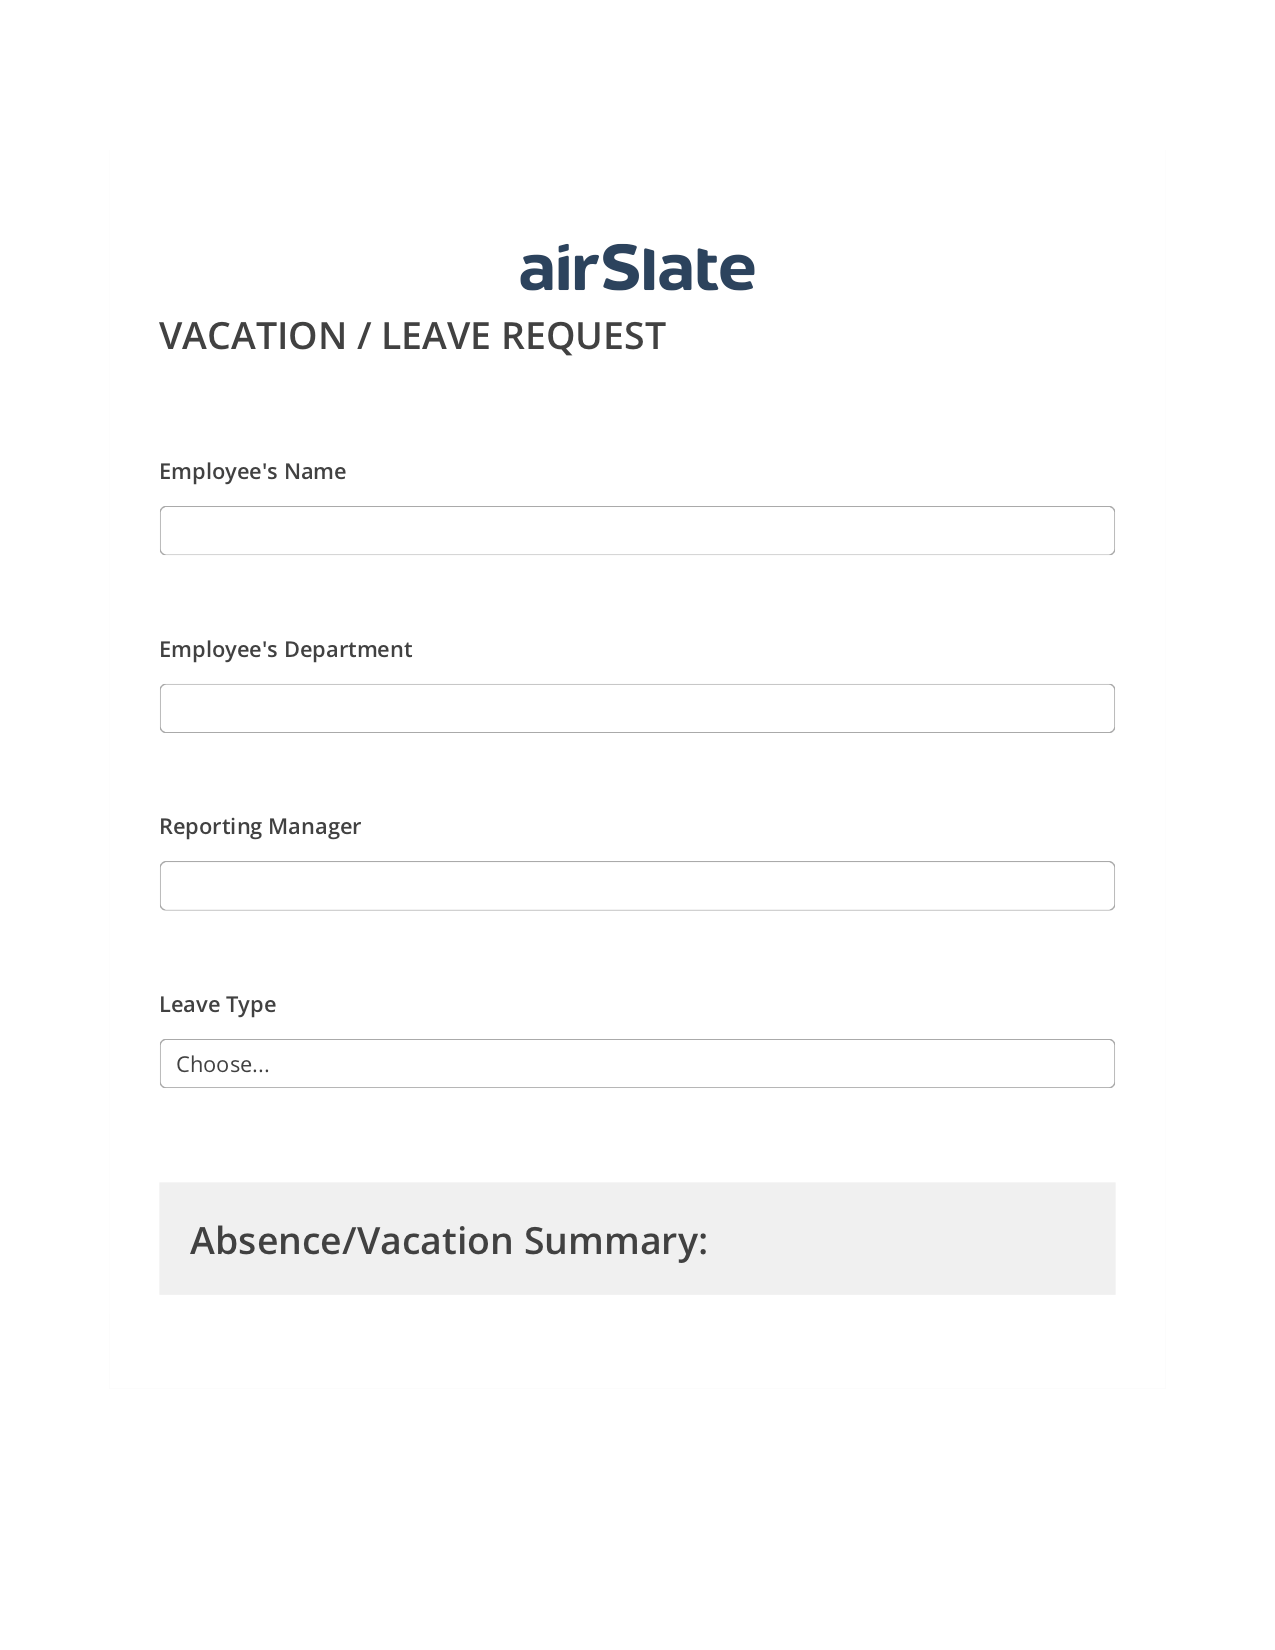 Multirole Vacation/Leave Request Workflow Pre-fill from Google Sheets Bot, Invoke Salesforce Process Bot, Archive to SharePoint Folder Bot